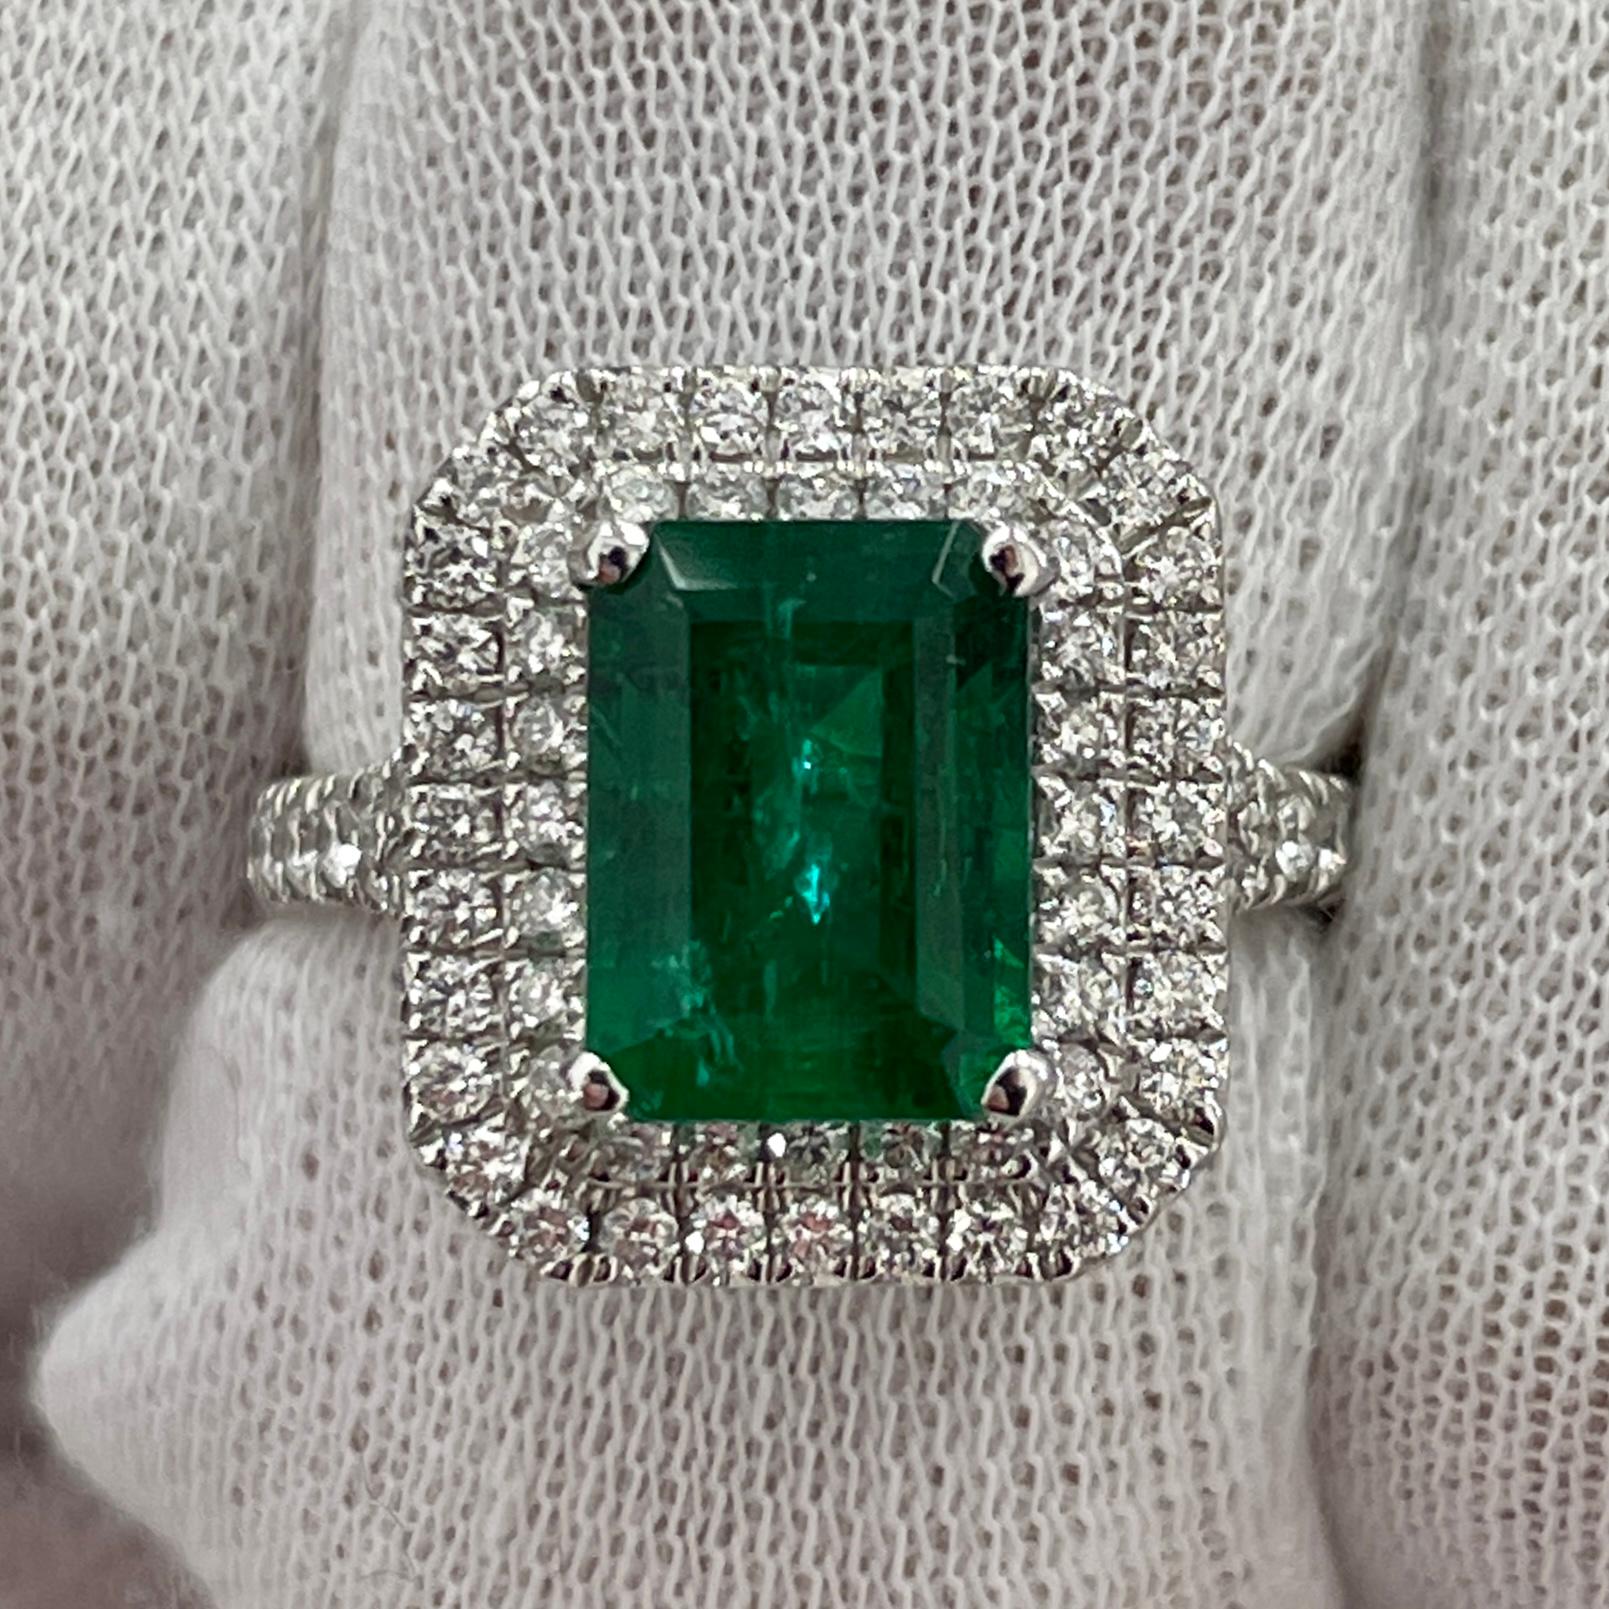 This is a very open color emerald cut emerald, mounted in an elegant 18K white gold and diamond ring with 0.80Ct of brilliant white diamonds. Suitable for any occasion!